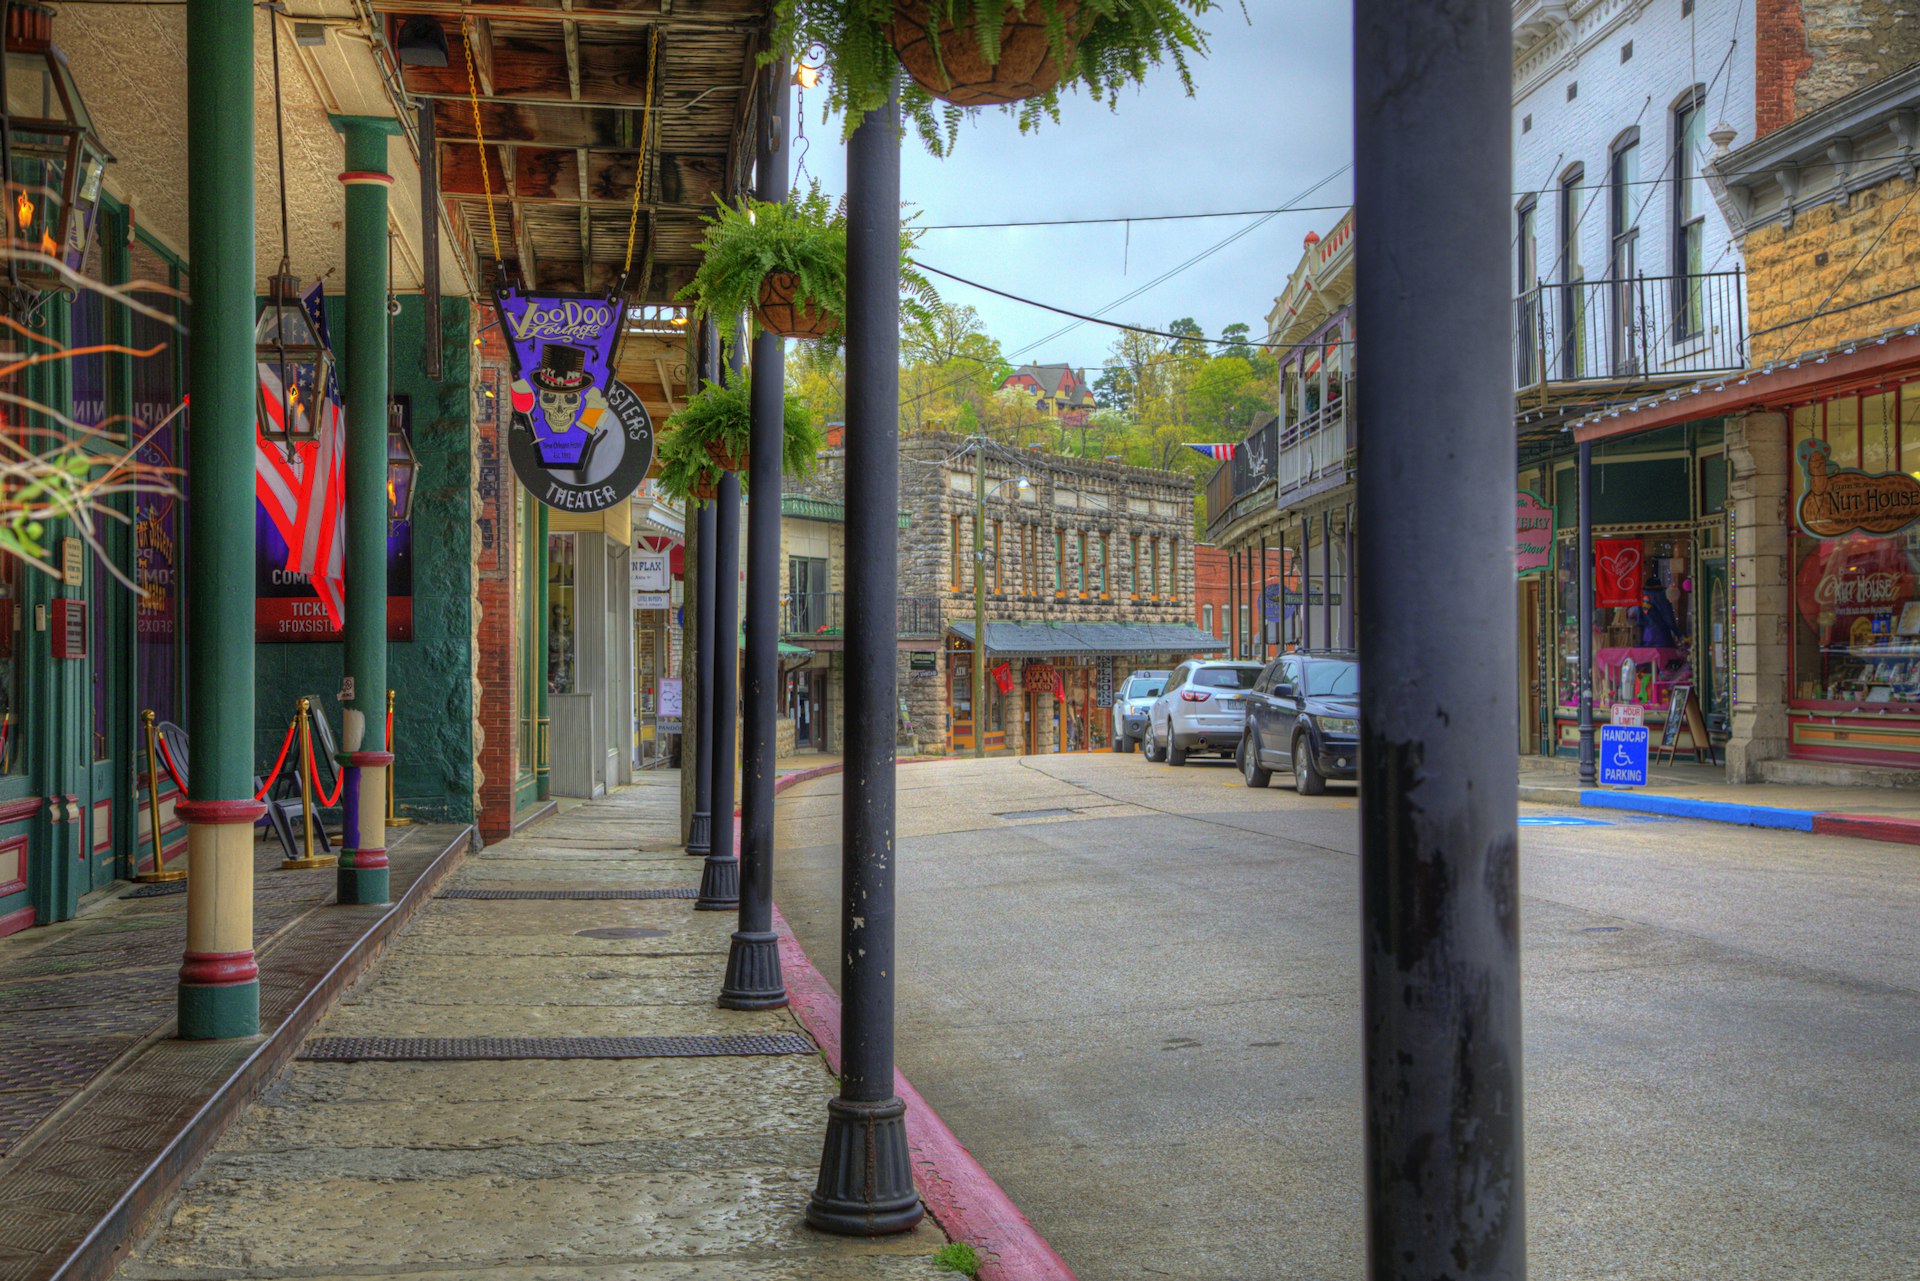 The colorful shopfronts and porches of Spring Street in Eureka Springs, Arkansas